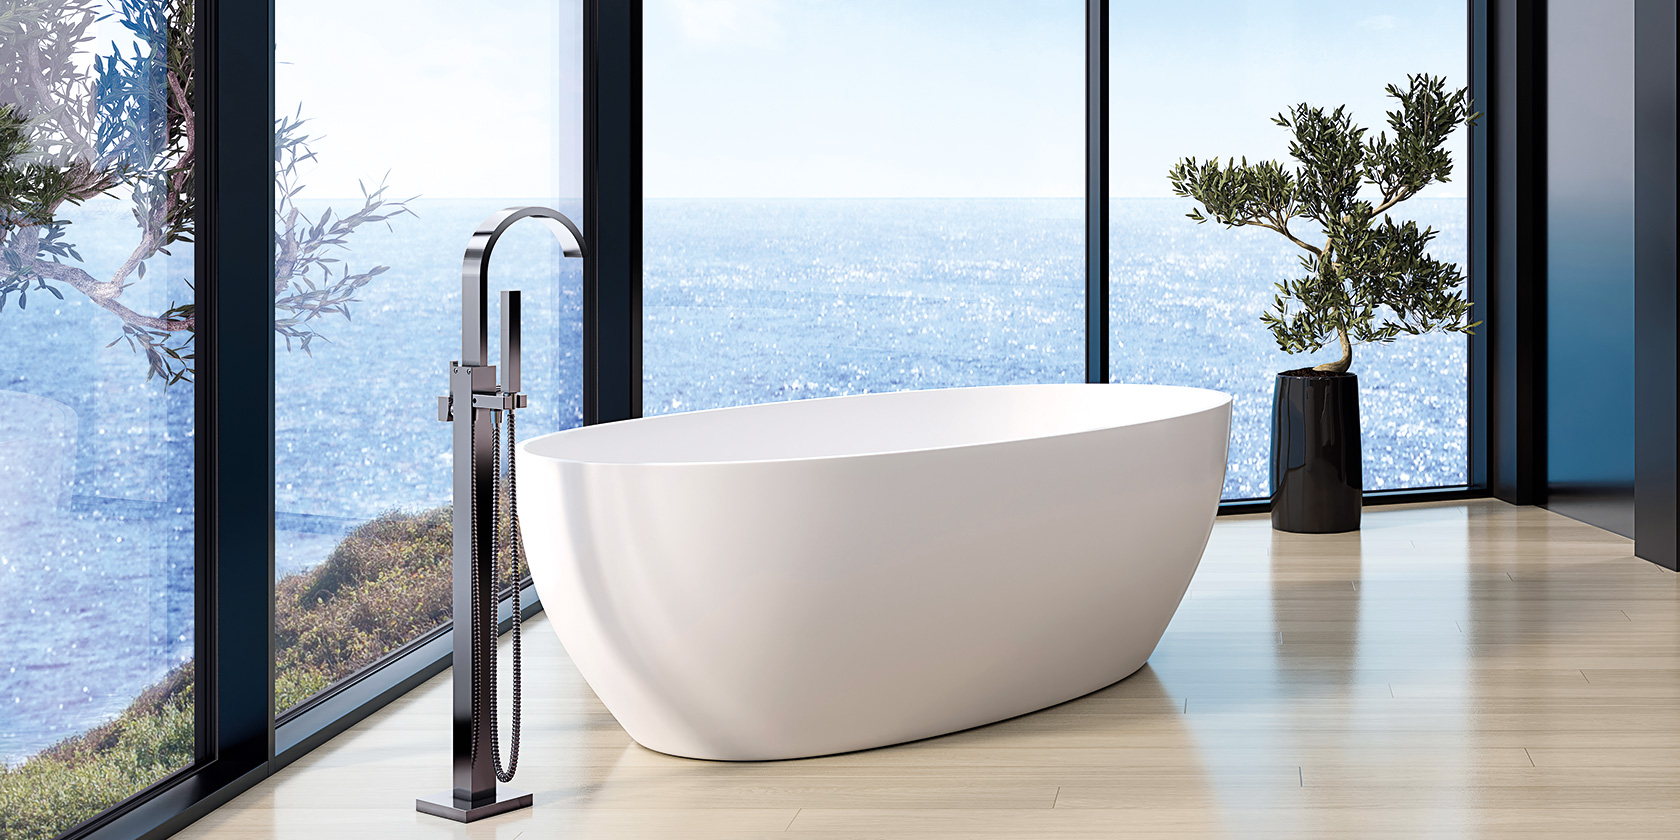 Empire Royal – Puristic design with a beautifully formed spout